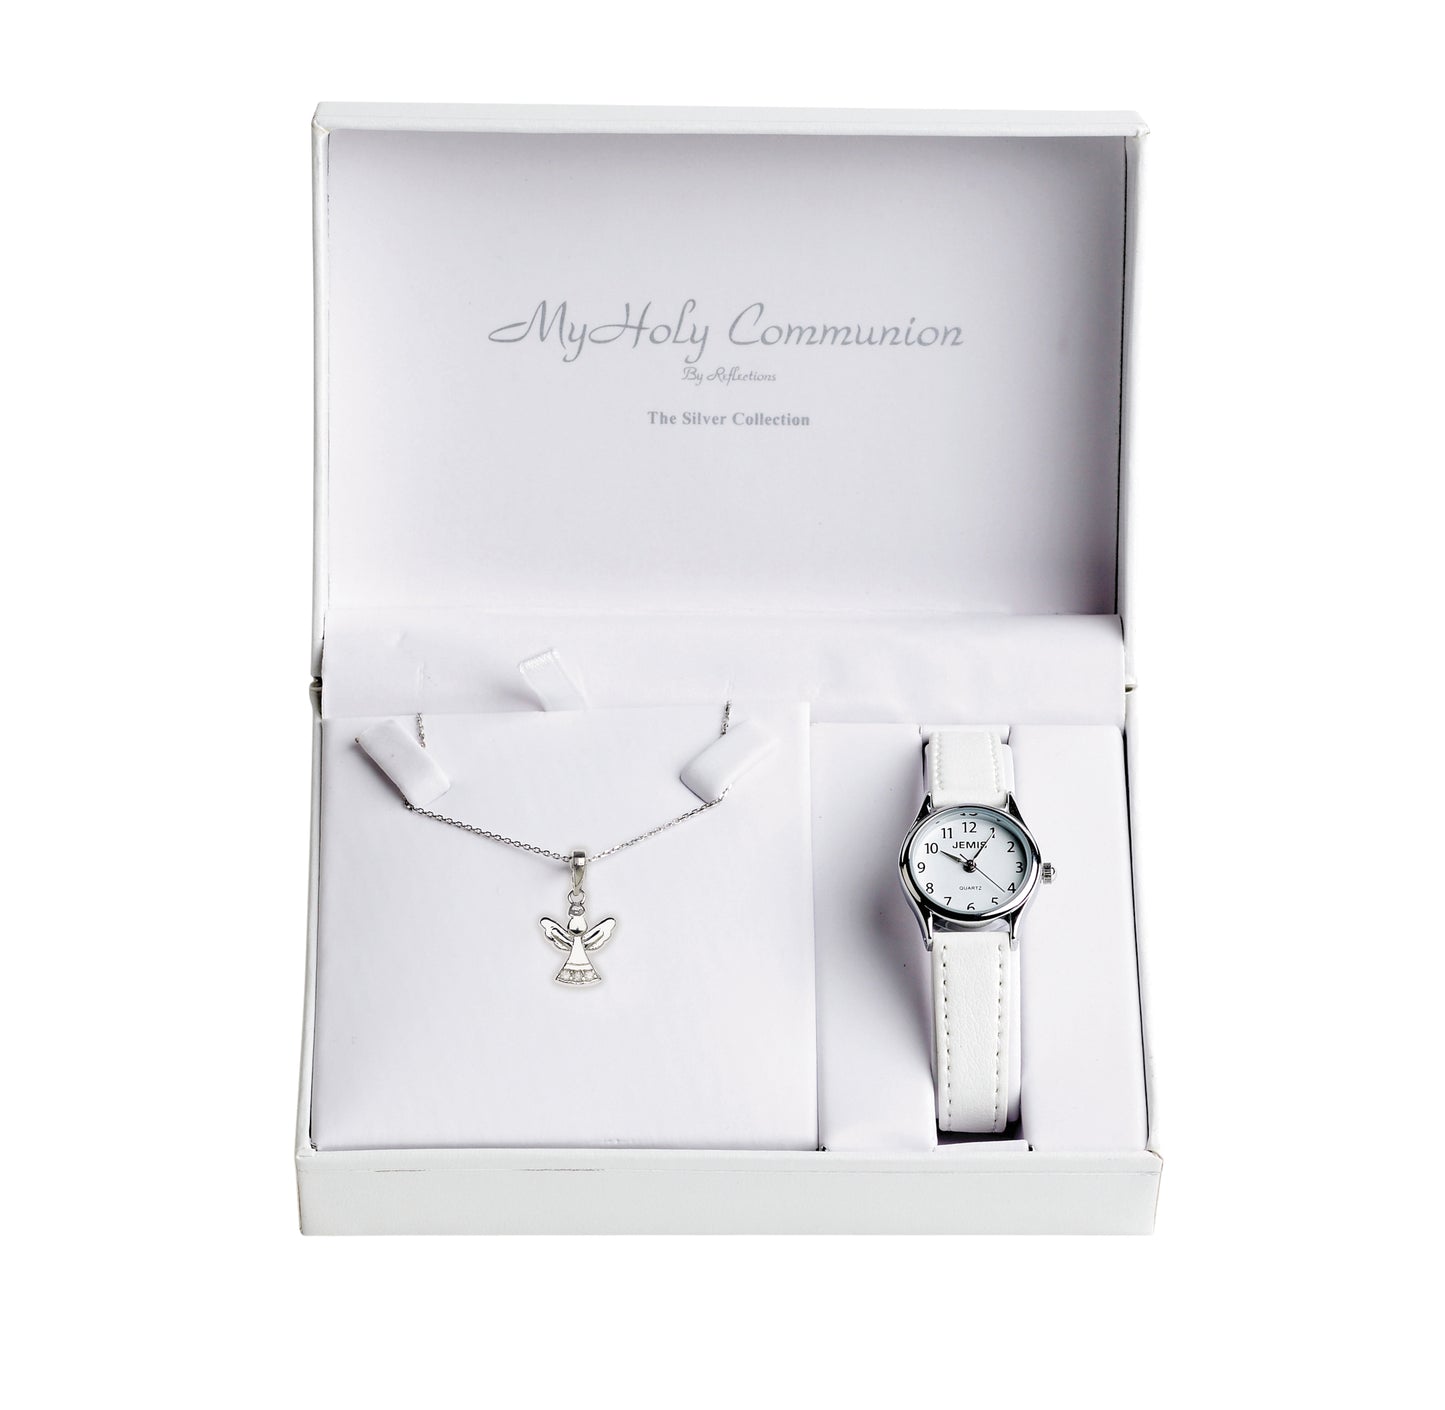 This First Holy Communion gift set comprising of a classic white watch and simple sterling silver pendant include the perfect accessories for any girls special day.   This darling watch with a simple white face and snow white leather strap is set in a silver bezel. Accompanied with the beautiful angel pendant set with cubic zirconia srones, hanging on an adjustable box chain, how could you resist these beauties?!